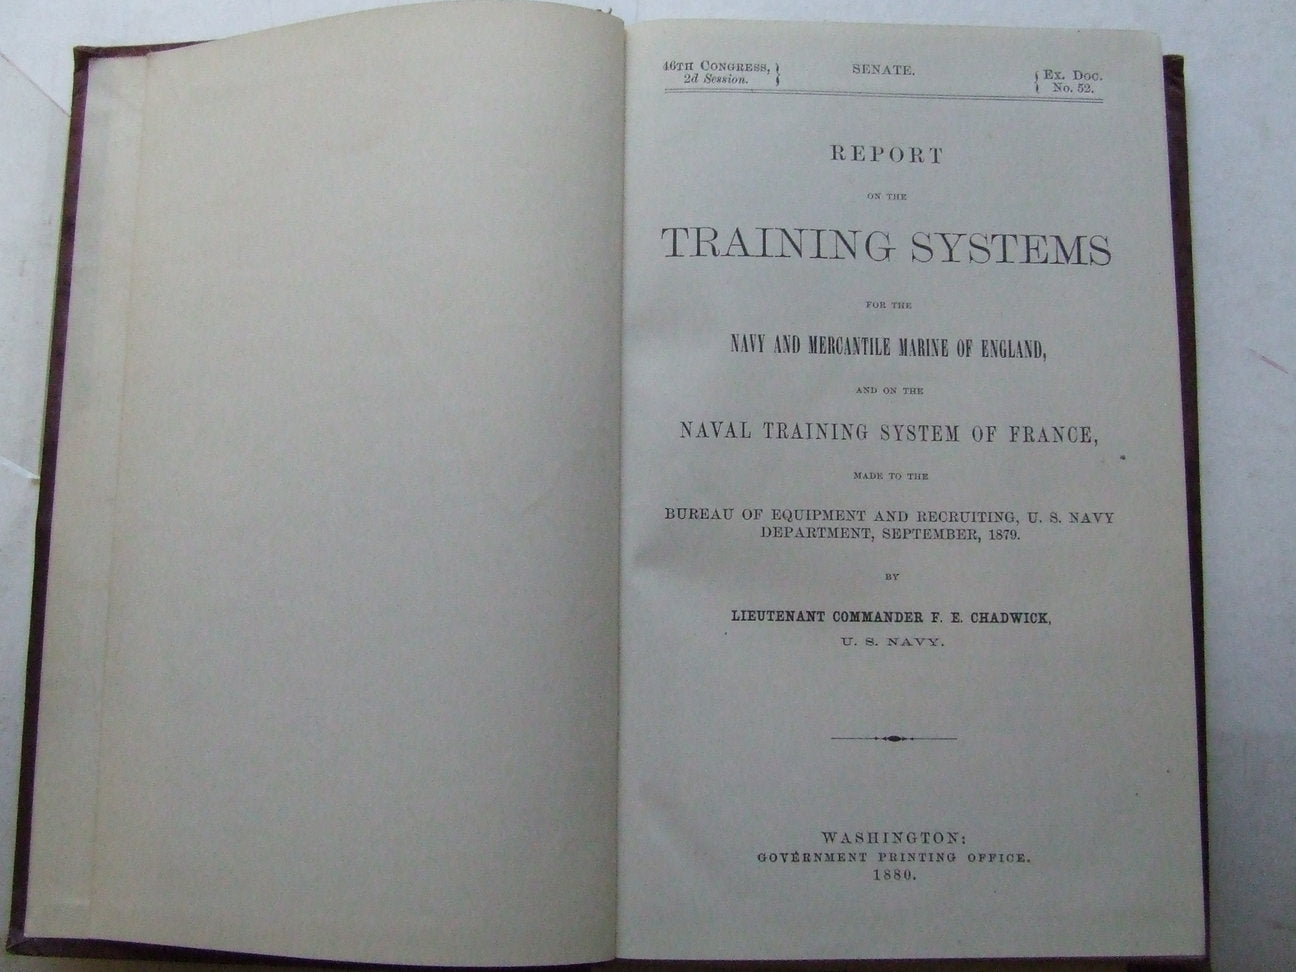 Report on the Training Systems for the Navy and Mercantile Marine of England